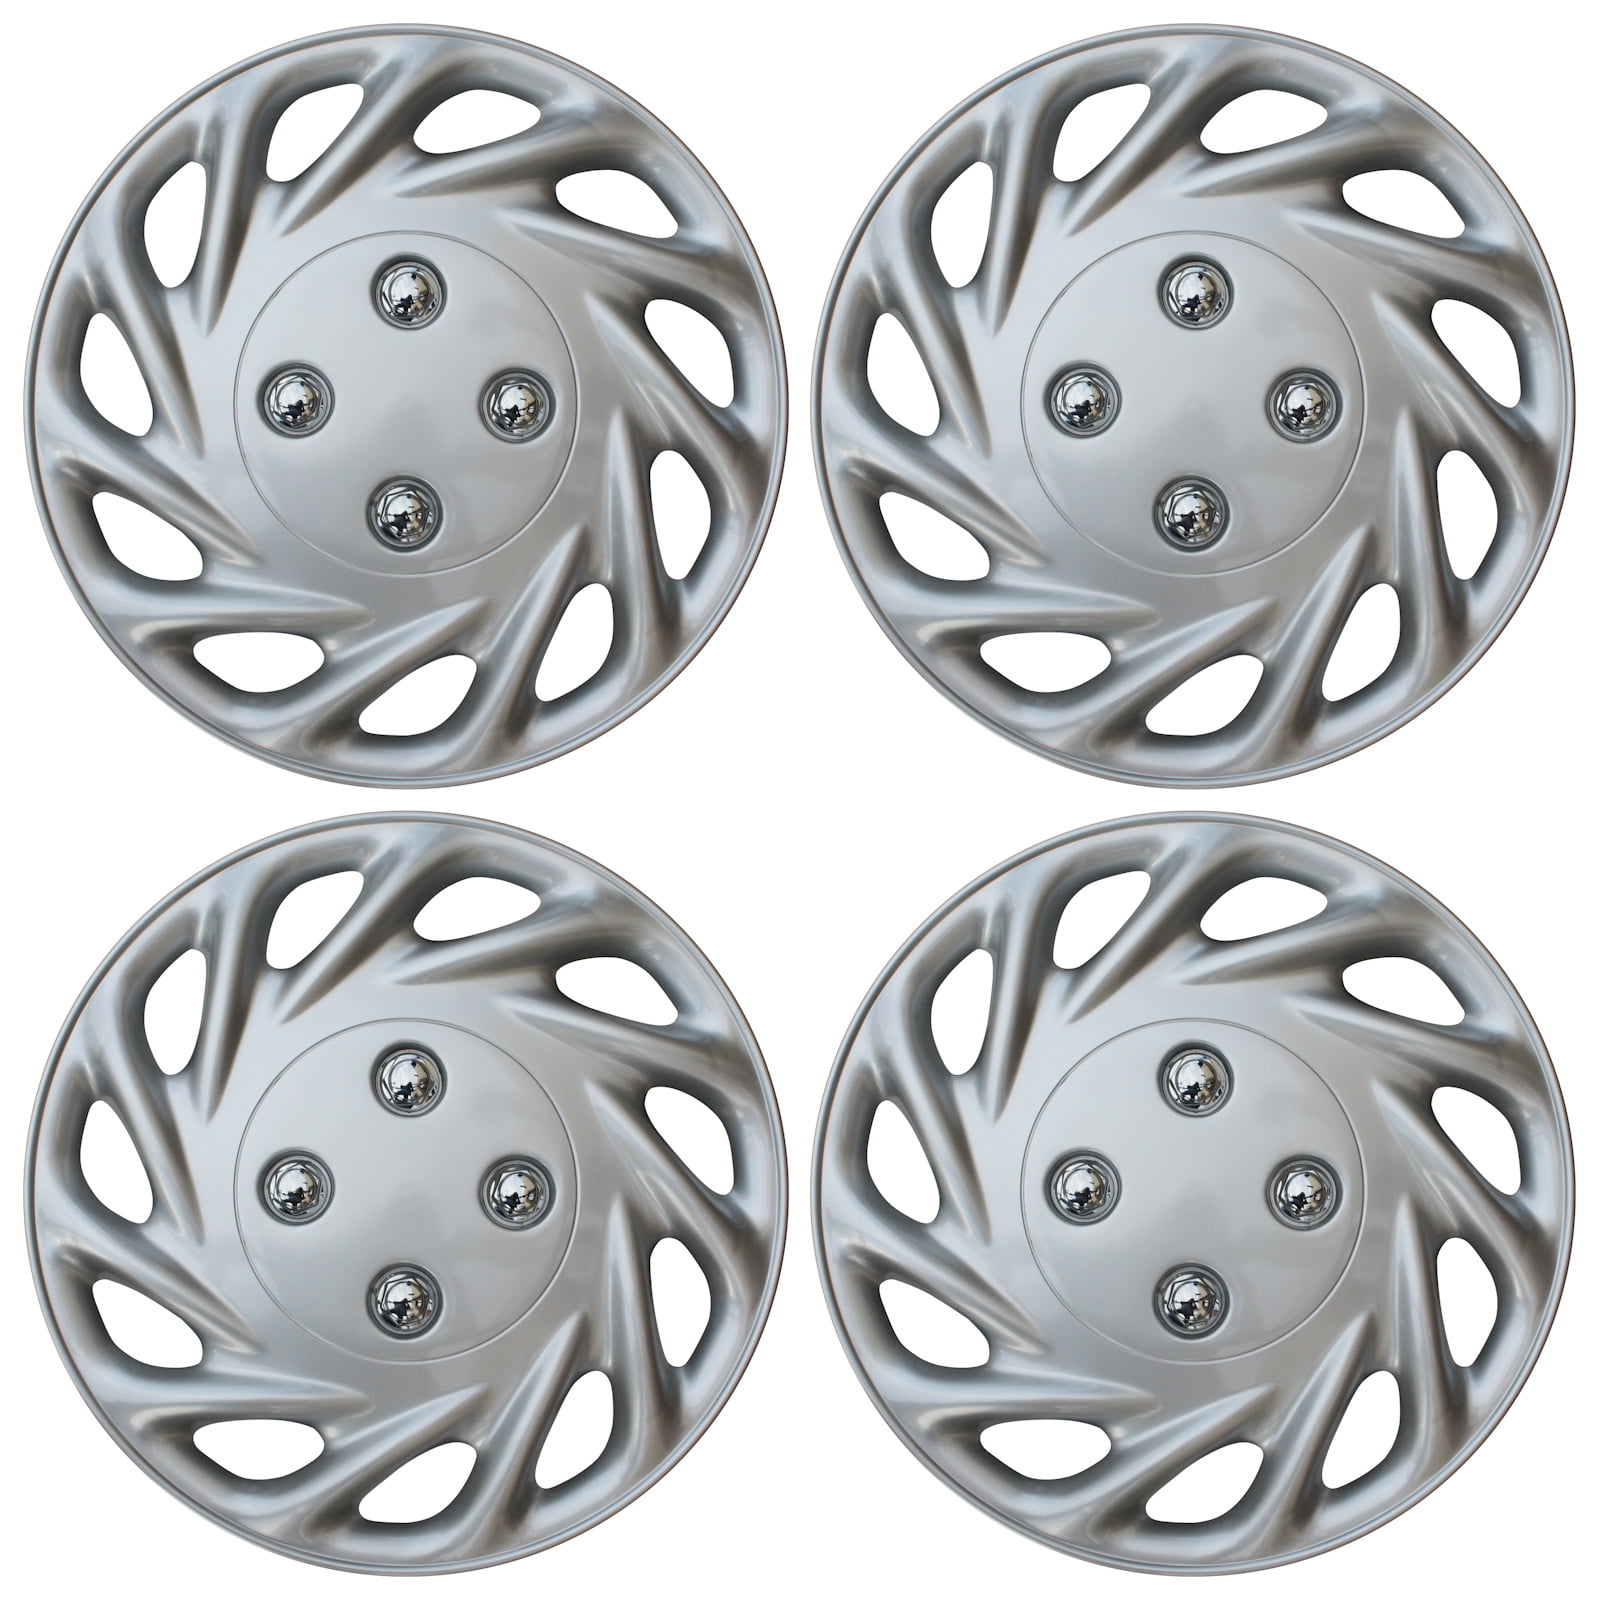 ATMOMO 13 Inch Silver Wheel Cover Kit 13'' Hubcap Wheel Cover Electrosilvering Pack of 4 